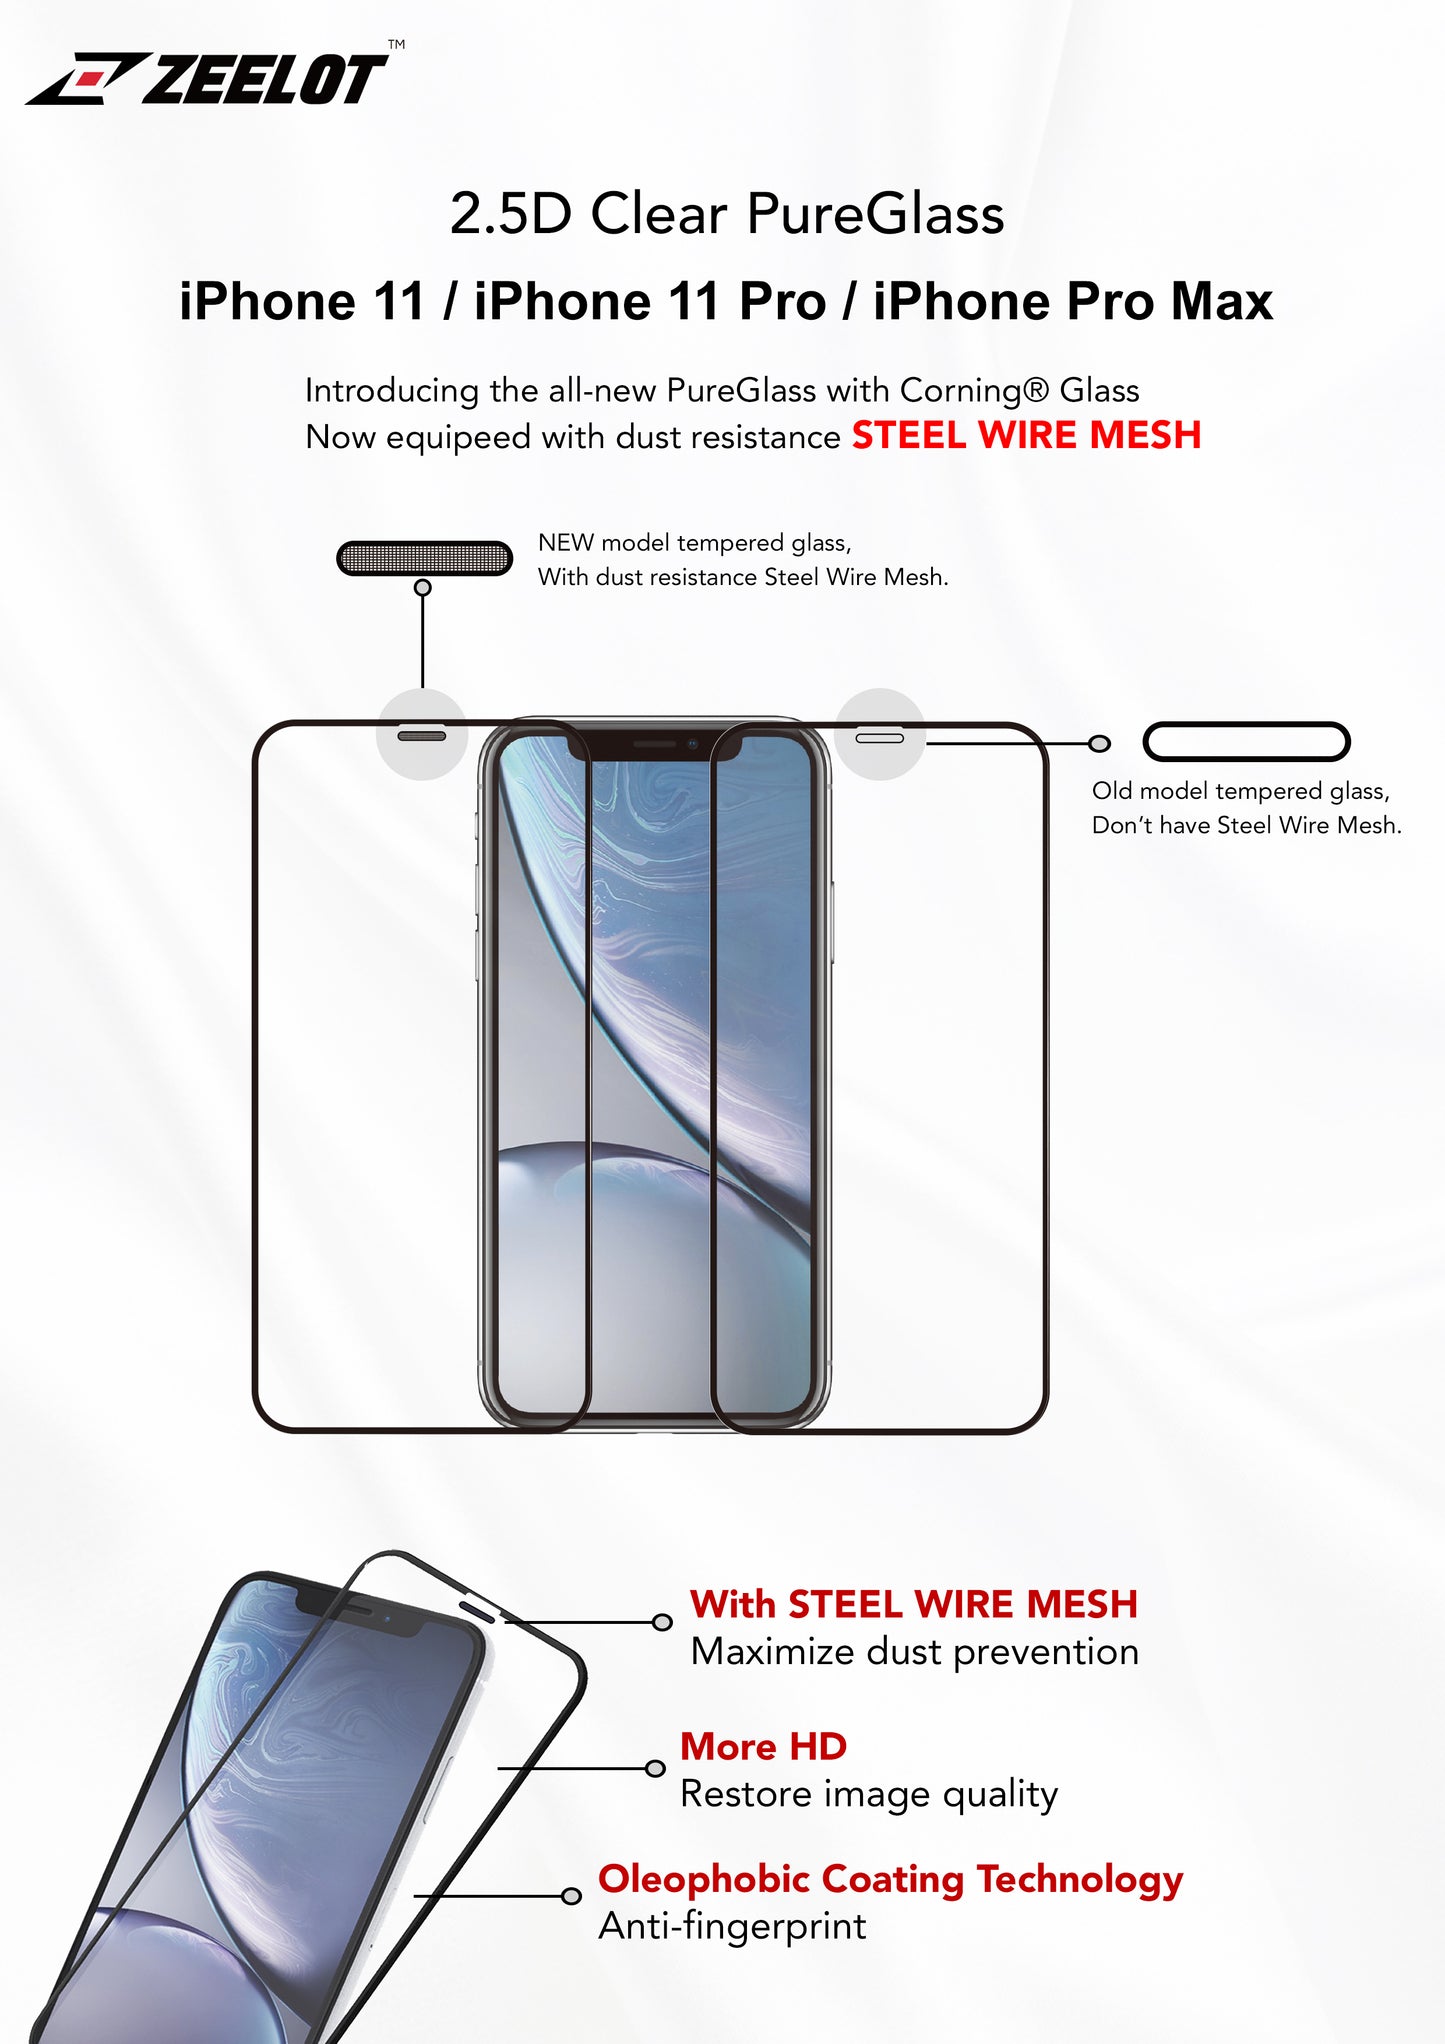 iPhone 11 Pro Max Clear 2.5D Tempered Glass Screen Protector Zeelot PureGlass Steel Wire